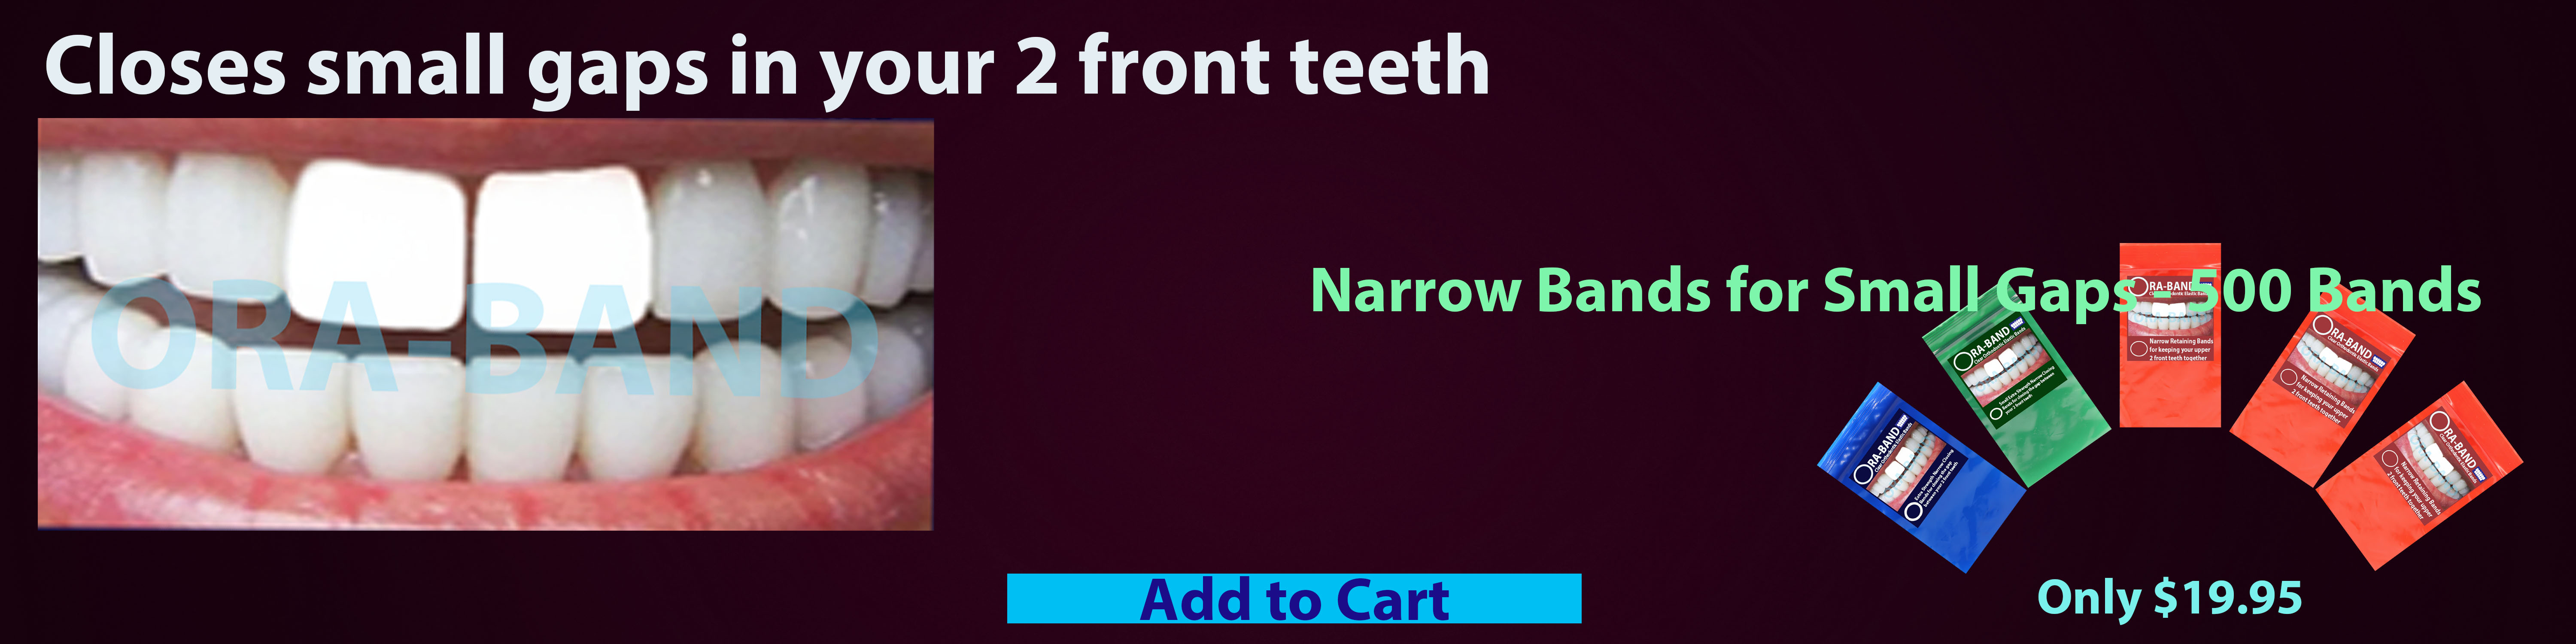 ORA-BAND 500 Band Narrow Bands Package for 
Small Gaps between your 2 front teeth